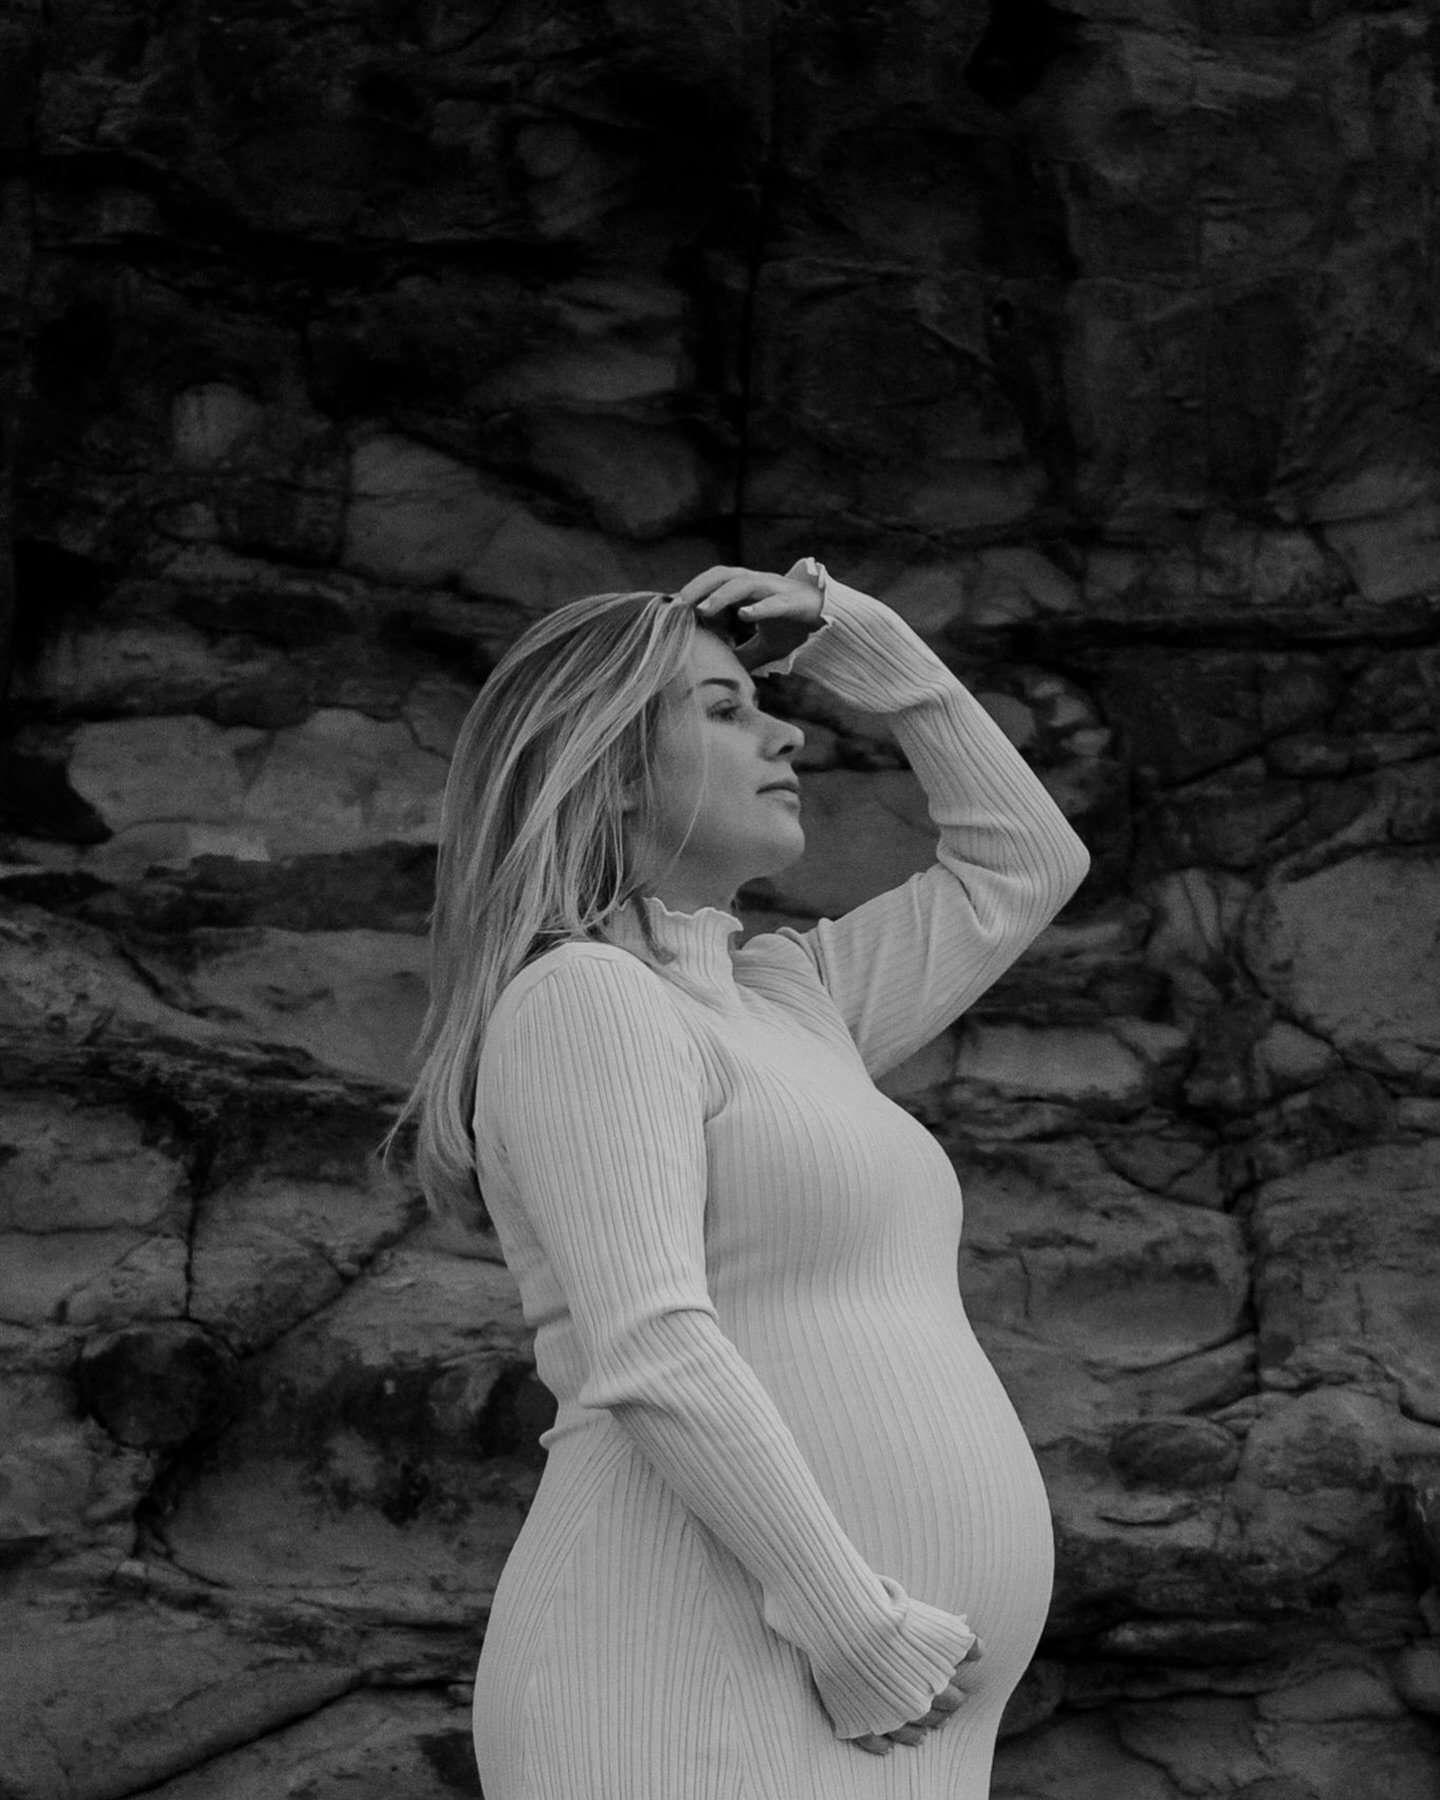 Pregnancy is a beautiful contradiction of feeling fiercely strong and tenderly vulnerable all at once. Motherhood, beauty and strength all rolled into one.